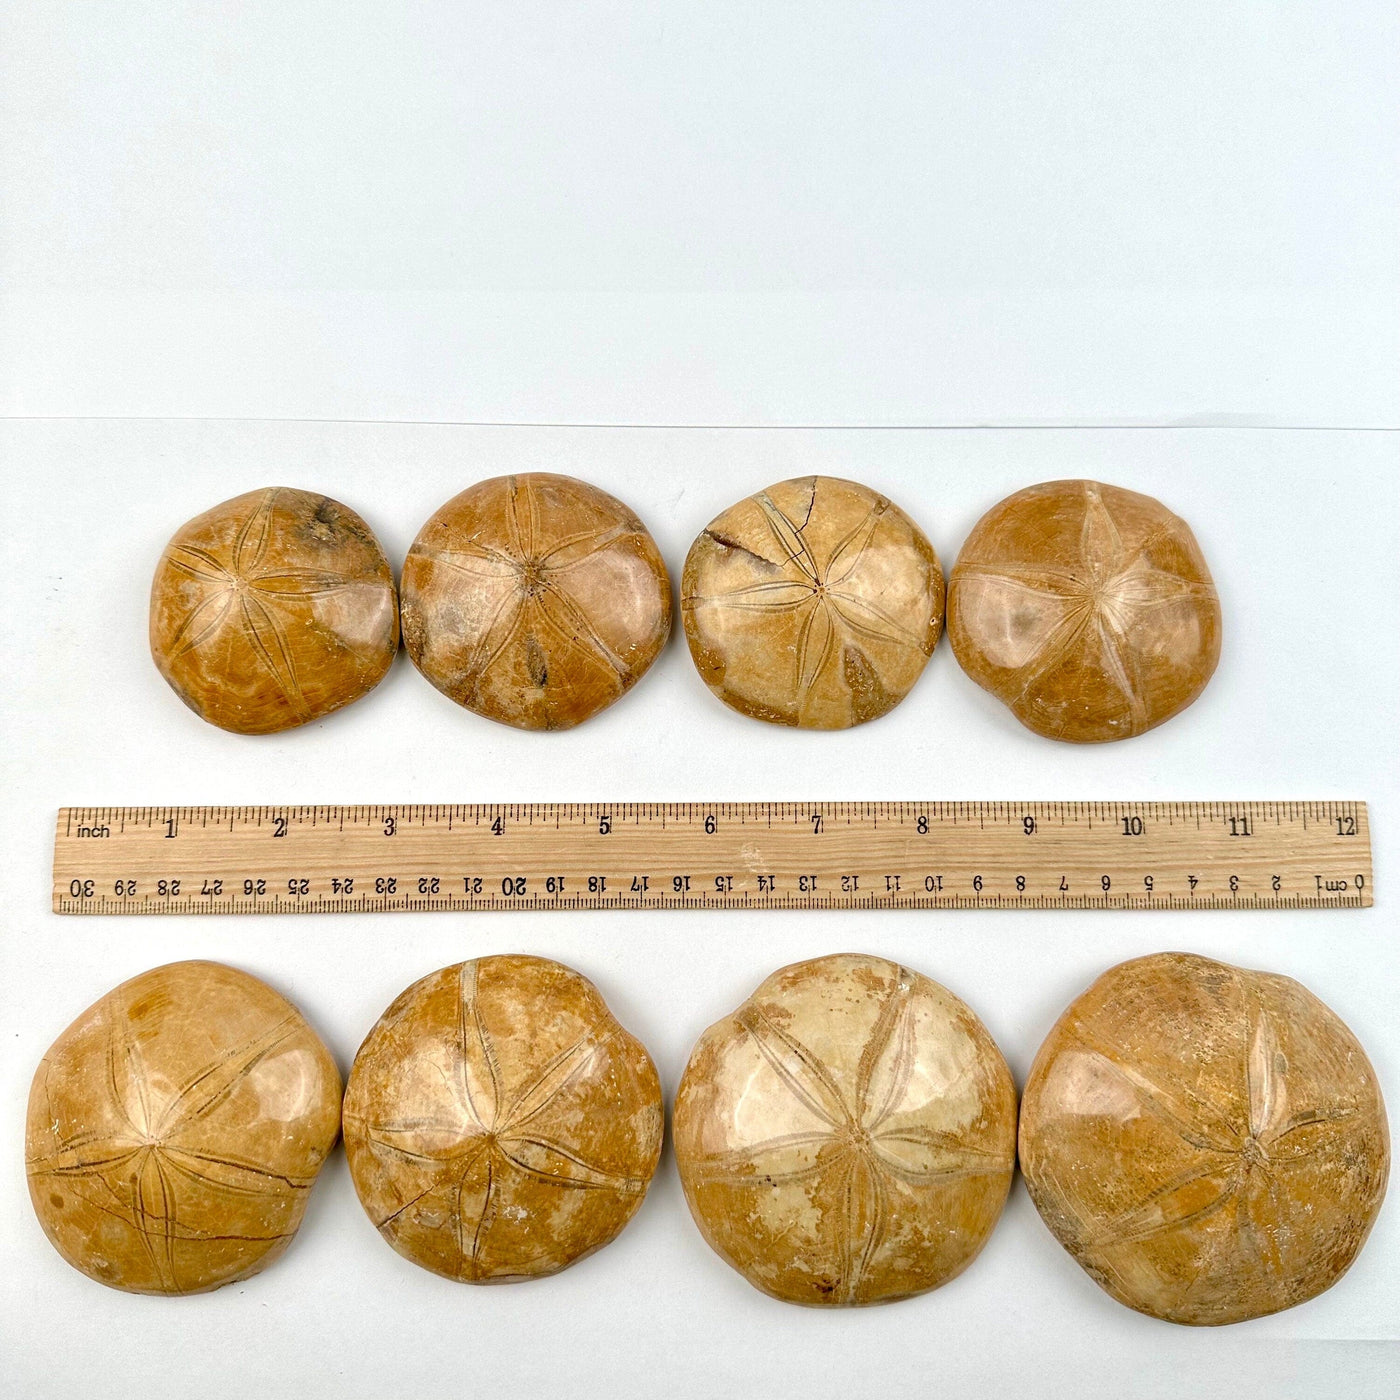 Fossilized Polished Sand Dollars - You Choose all variants with ruler for size reference